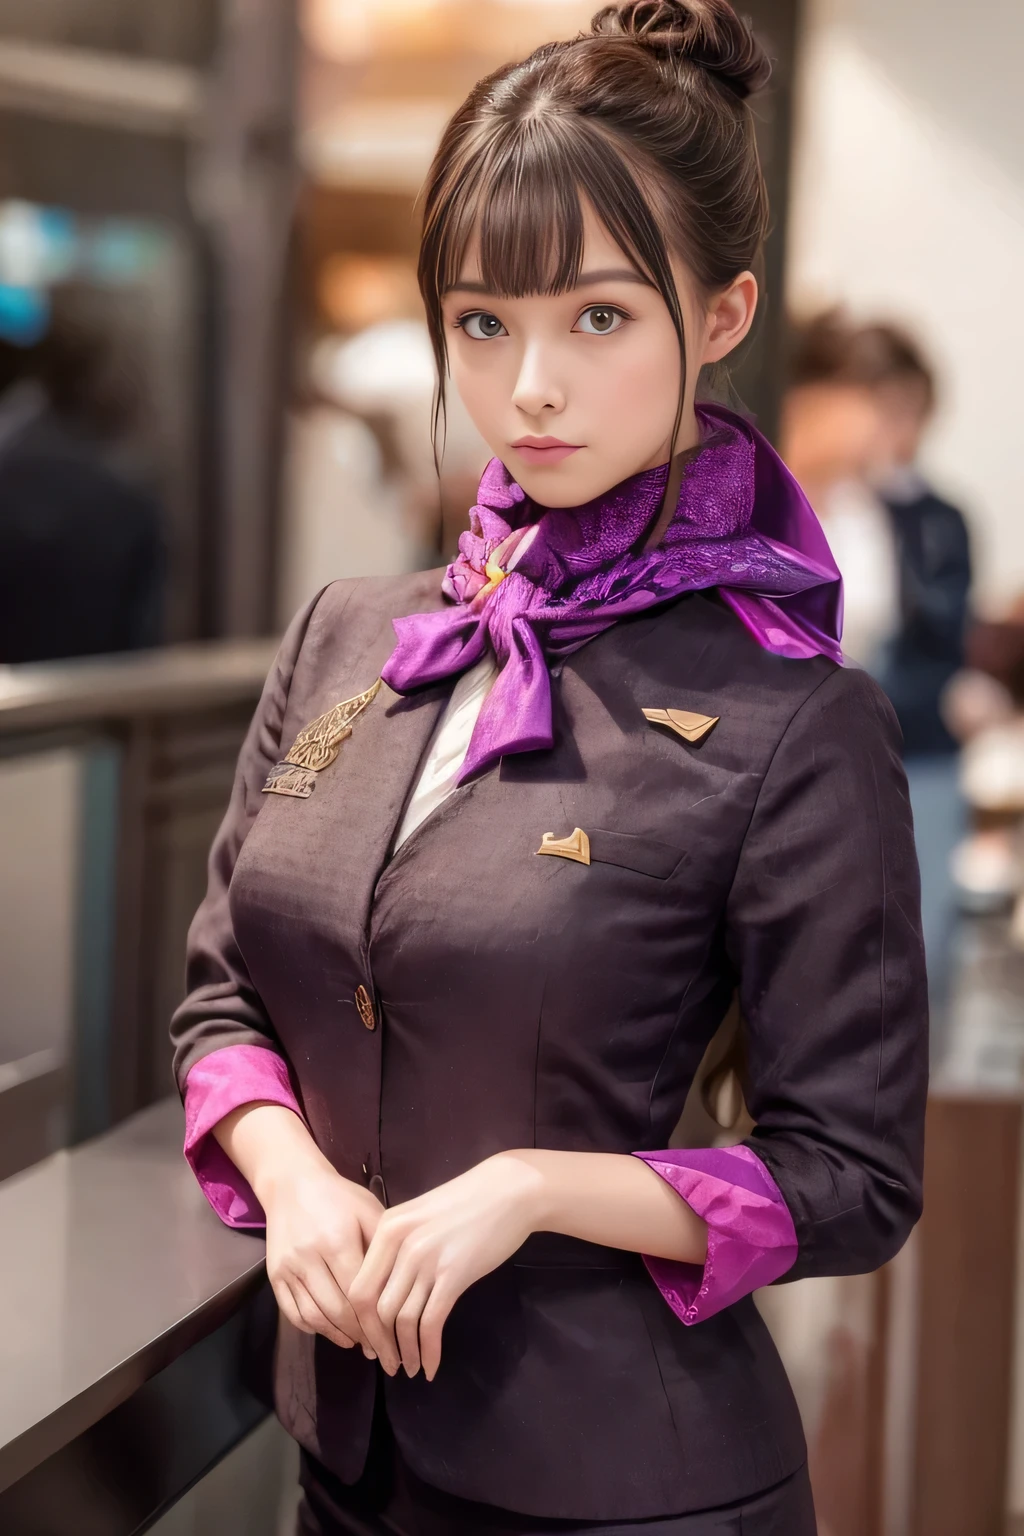 (masterpiece:1.2、highest quality:1.2)、32K HDR、High resolution、(alone、1 girl、Slim figure)、（Realistic reproduction of Etihad Airways flight attendant uniforms）、 (At the airport counter, Professional Lighting)、A proper woman, Beautiful Face,、（Etihad Airways flight attendant long sleeve uniform）、（Etihad Airways flight attendant uniforms、Skirt with purple stripes on the front）、（scarf on chest）、Big Breasts、（long hair、Hair Bun）、Dark brown hair、Long Shot、（（Great hands：2.0））、（（Harmonious body proportions：1.5））、（（Normal limbs：2.0））、（（Normal finger：2.0））、（（Delicate eyes：2.0））、（（Normal eyes：2.0））)、Beautiful standing posture、Captivating look